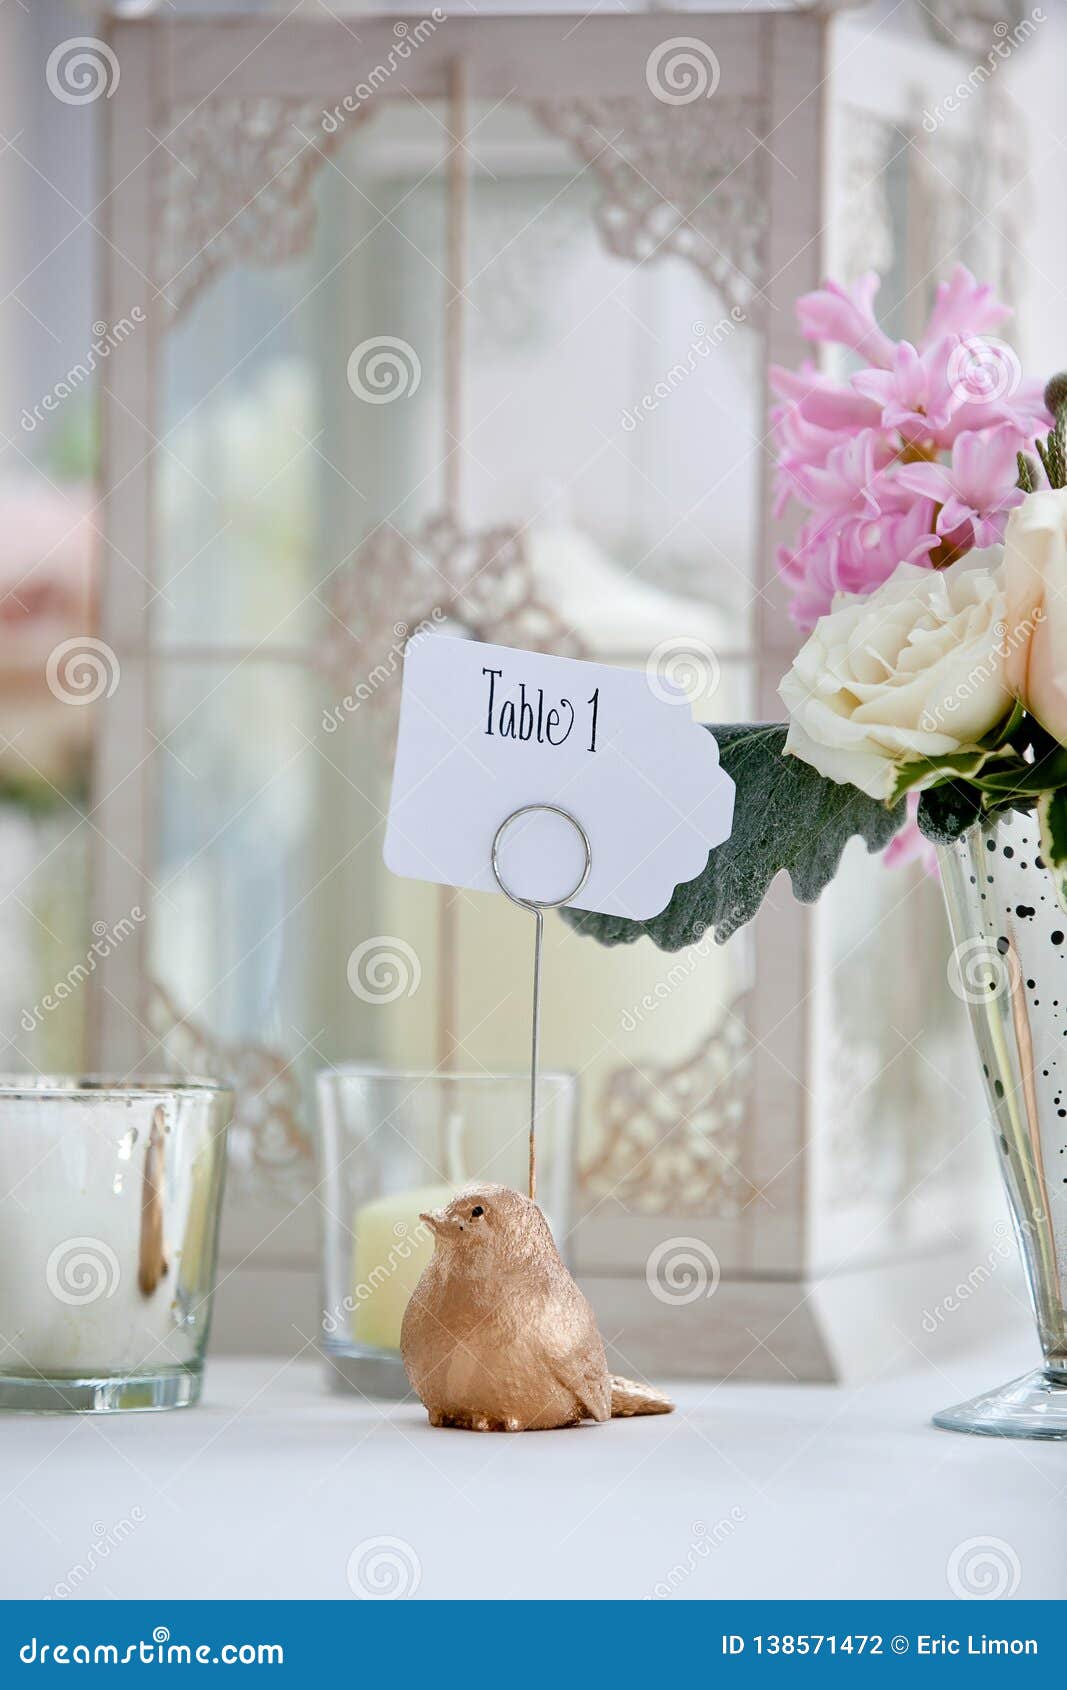 wedding table decoration series - pink and white bouquet of flowers and a bird holding a table 1 sign